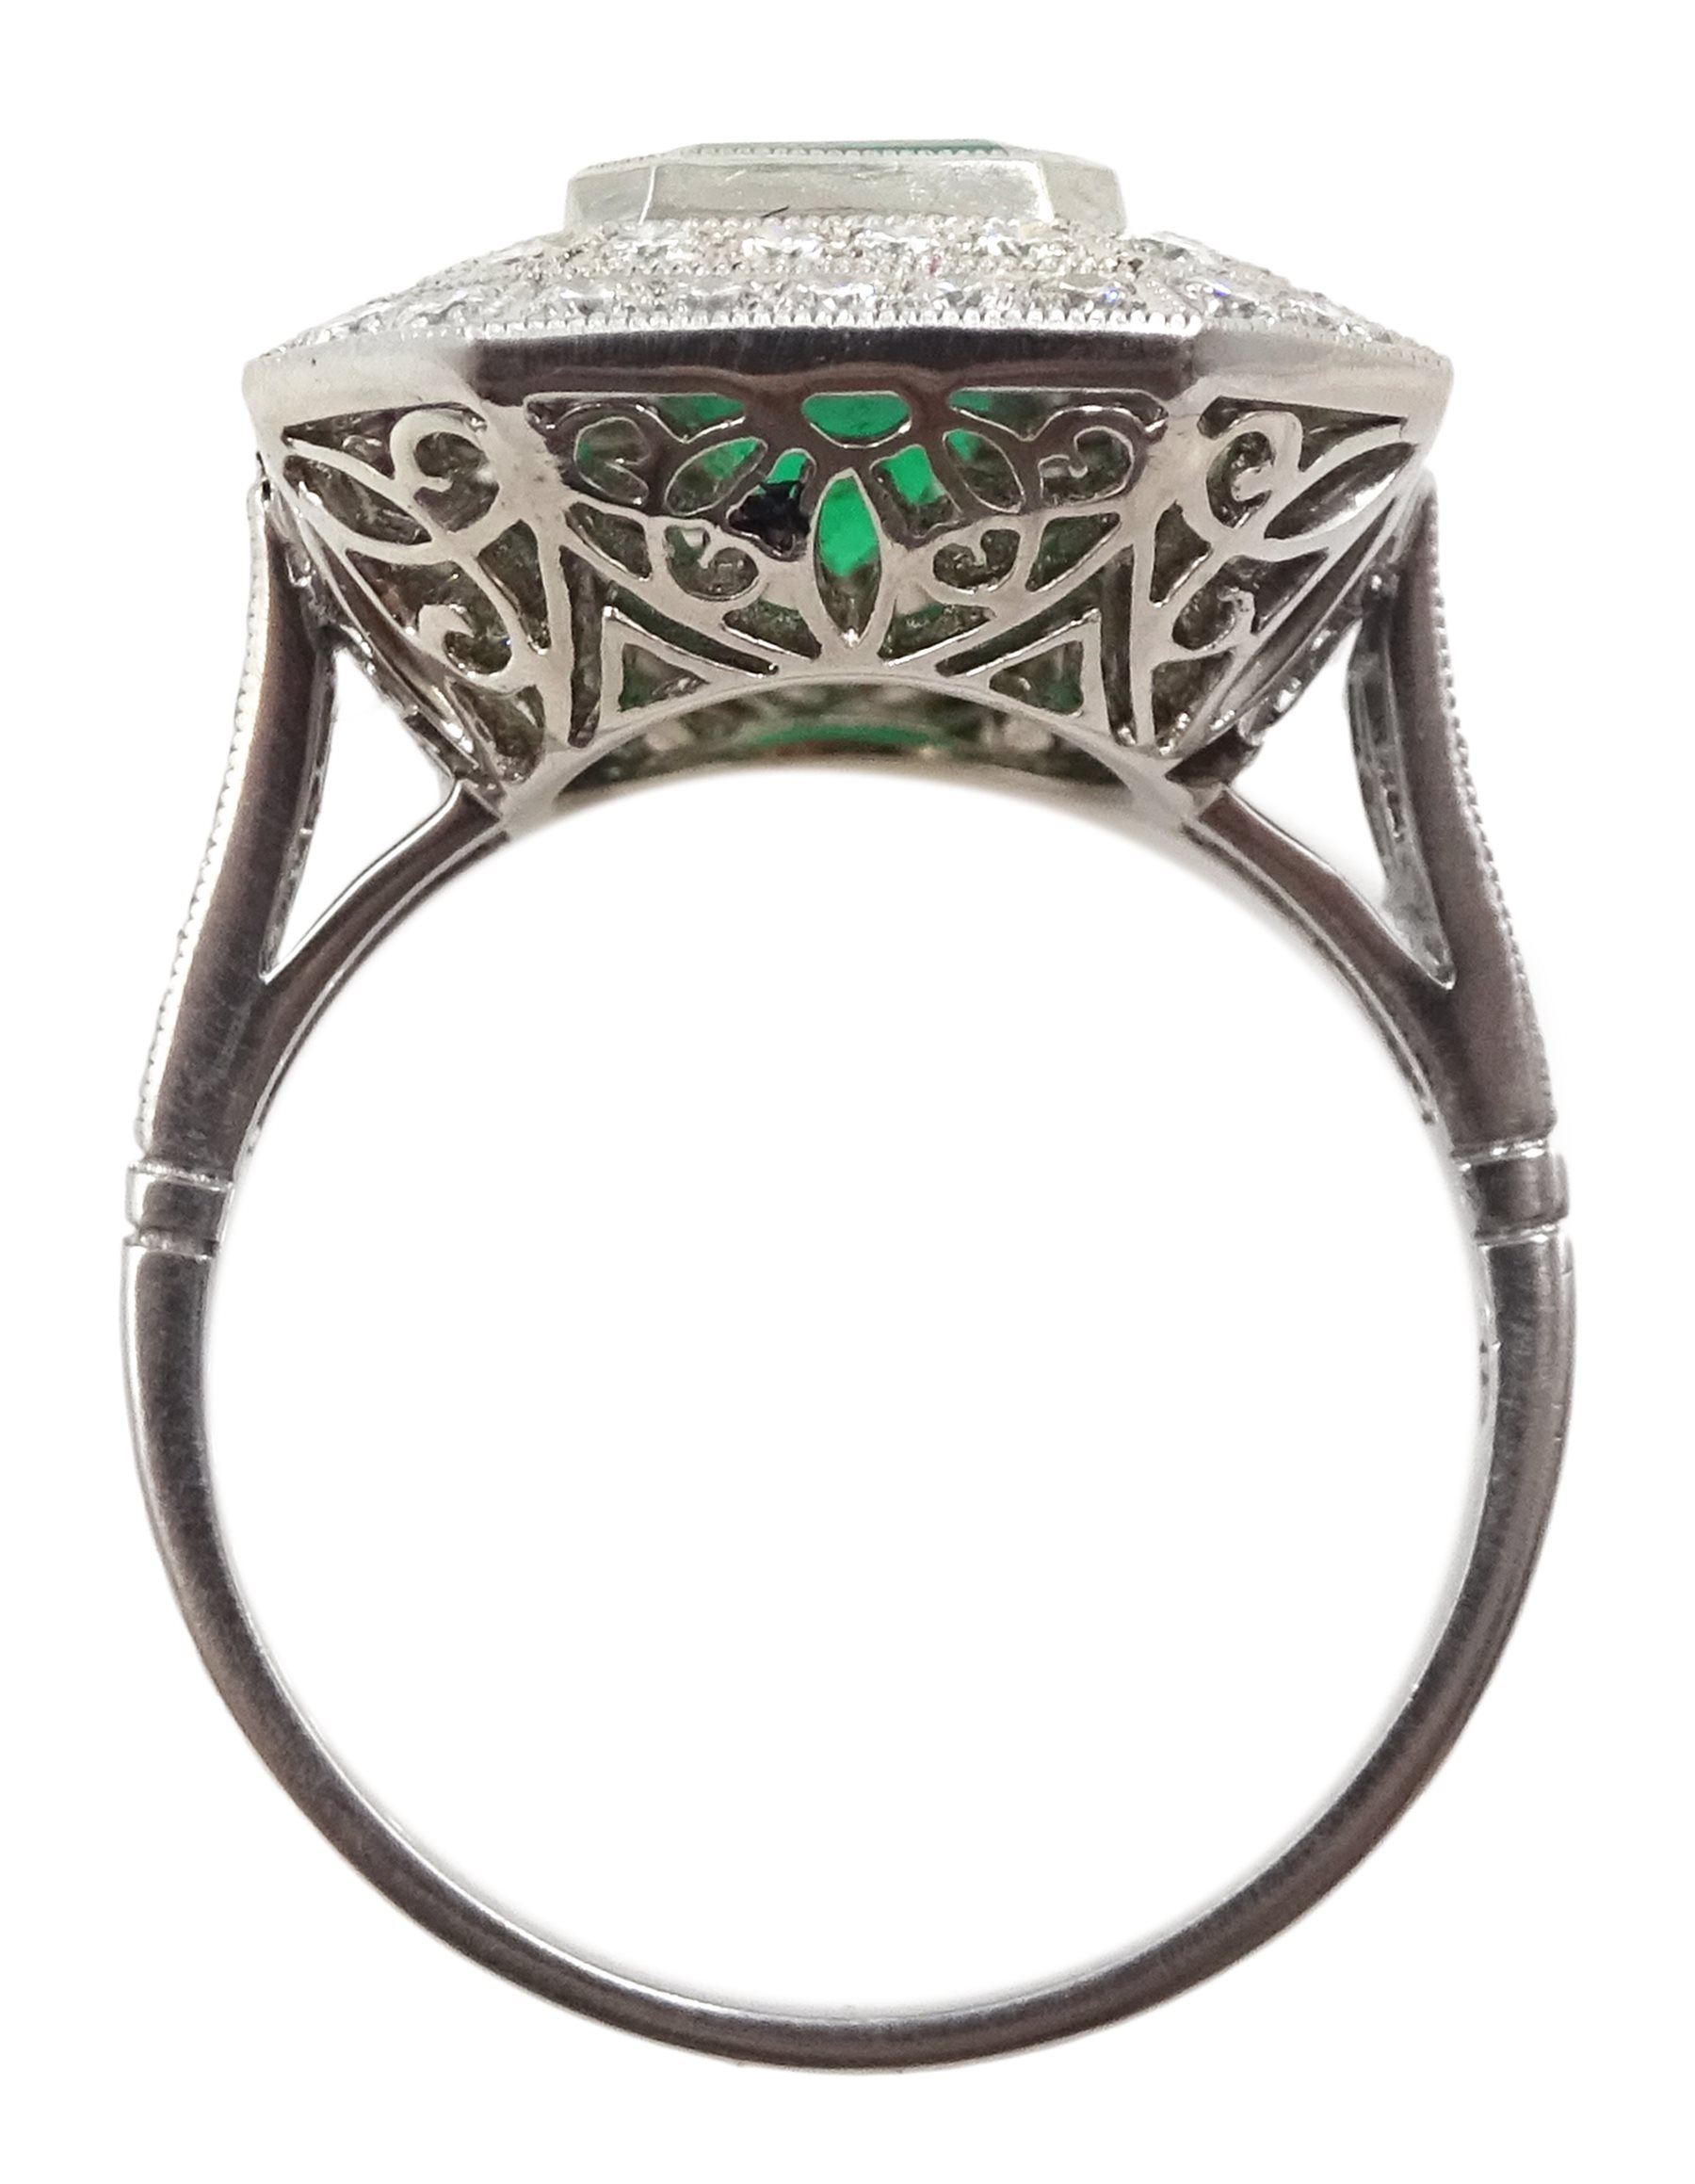 Platinum emerald and double row diamond ring, with diamond set shoulders, emerald approx 1.85 carat, - Image 5 of 5